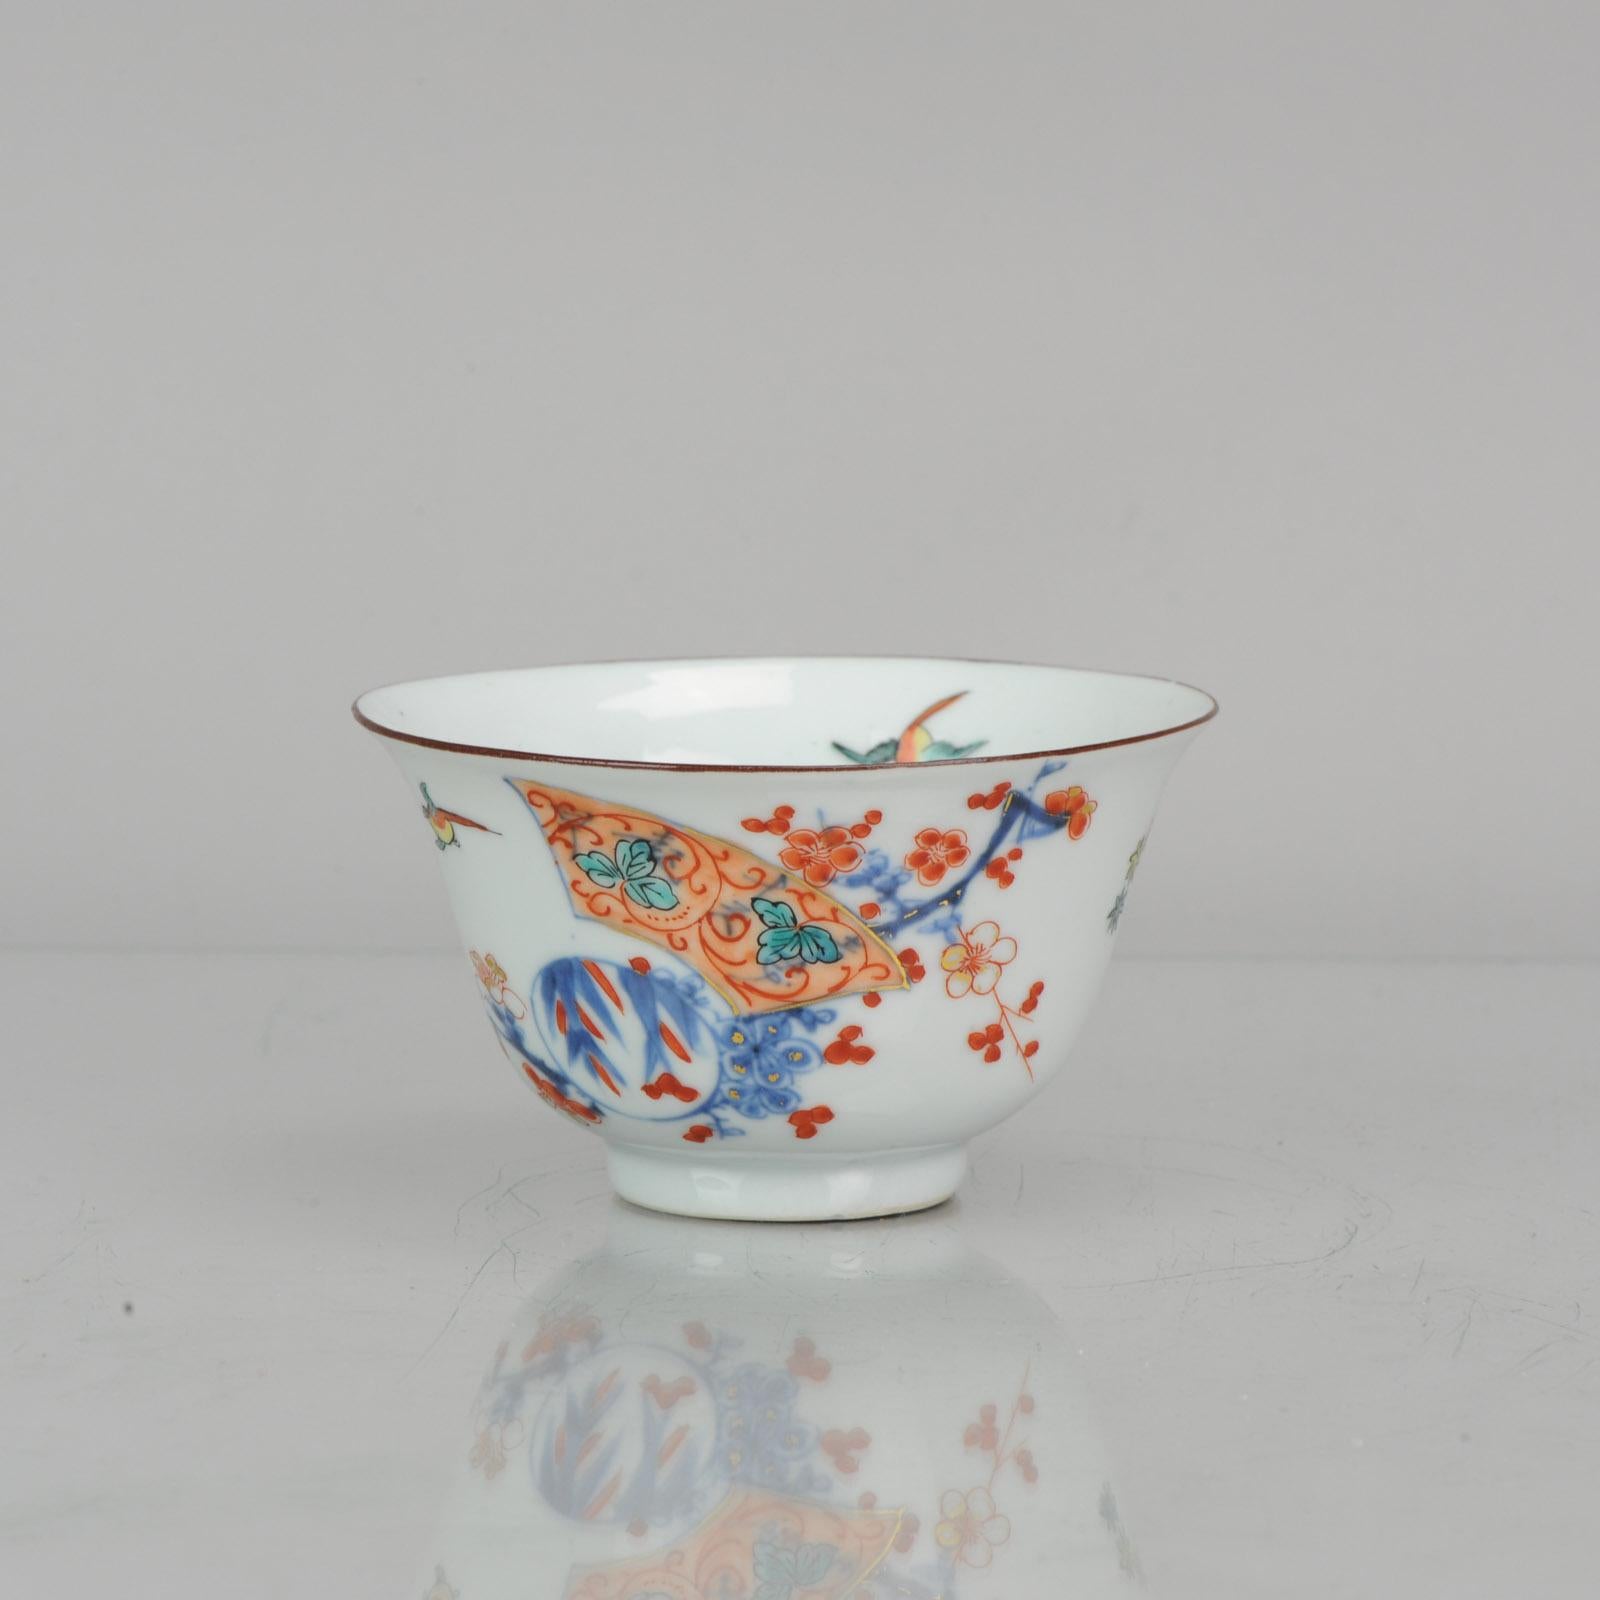 A Japanese Kakiemon-style bird-and-flower painting has been used here by a Dutch painter to decorate a Chinese porcelain bowl. The grouping of a pair of magpies, plum blossoms, and bamboo is a traditional Chinese image, which forms the rebus 